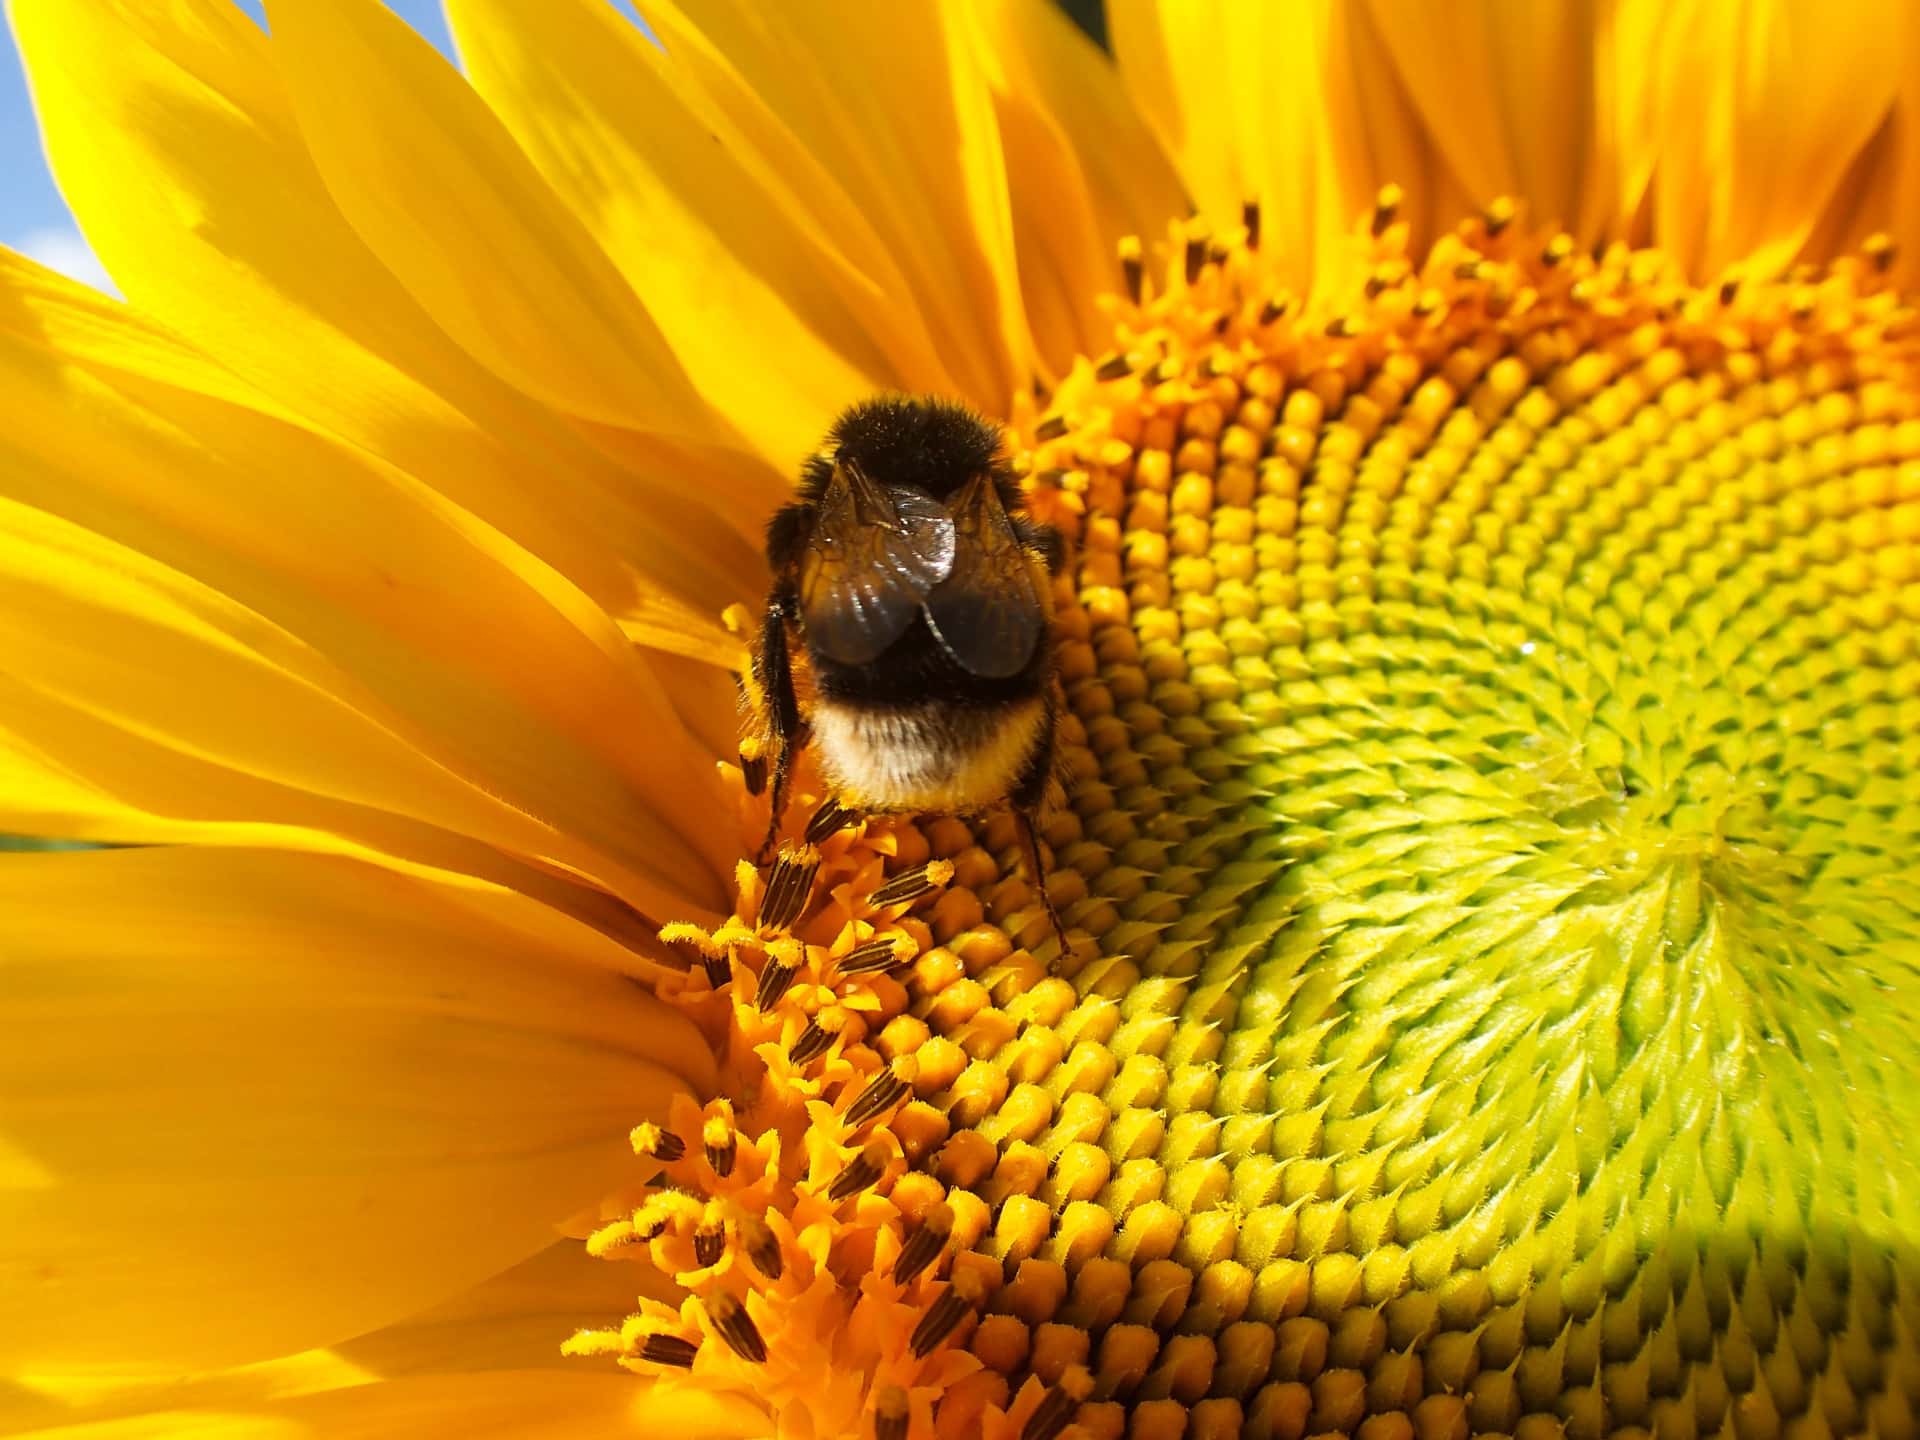 We all need to take action to help our declining bee populations